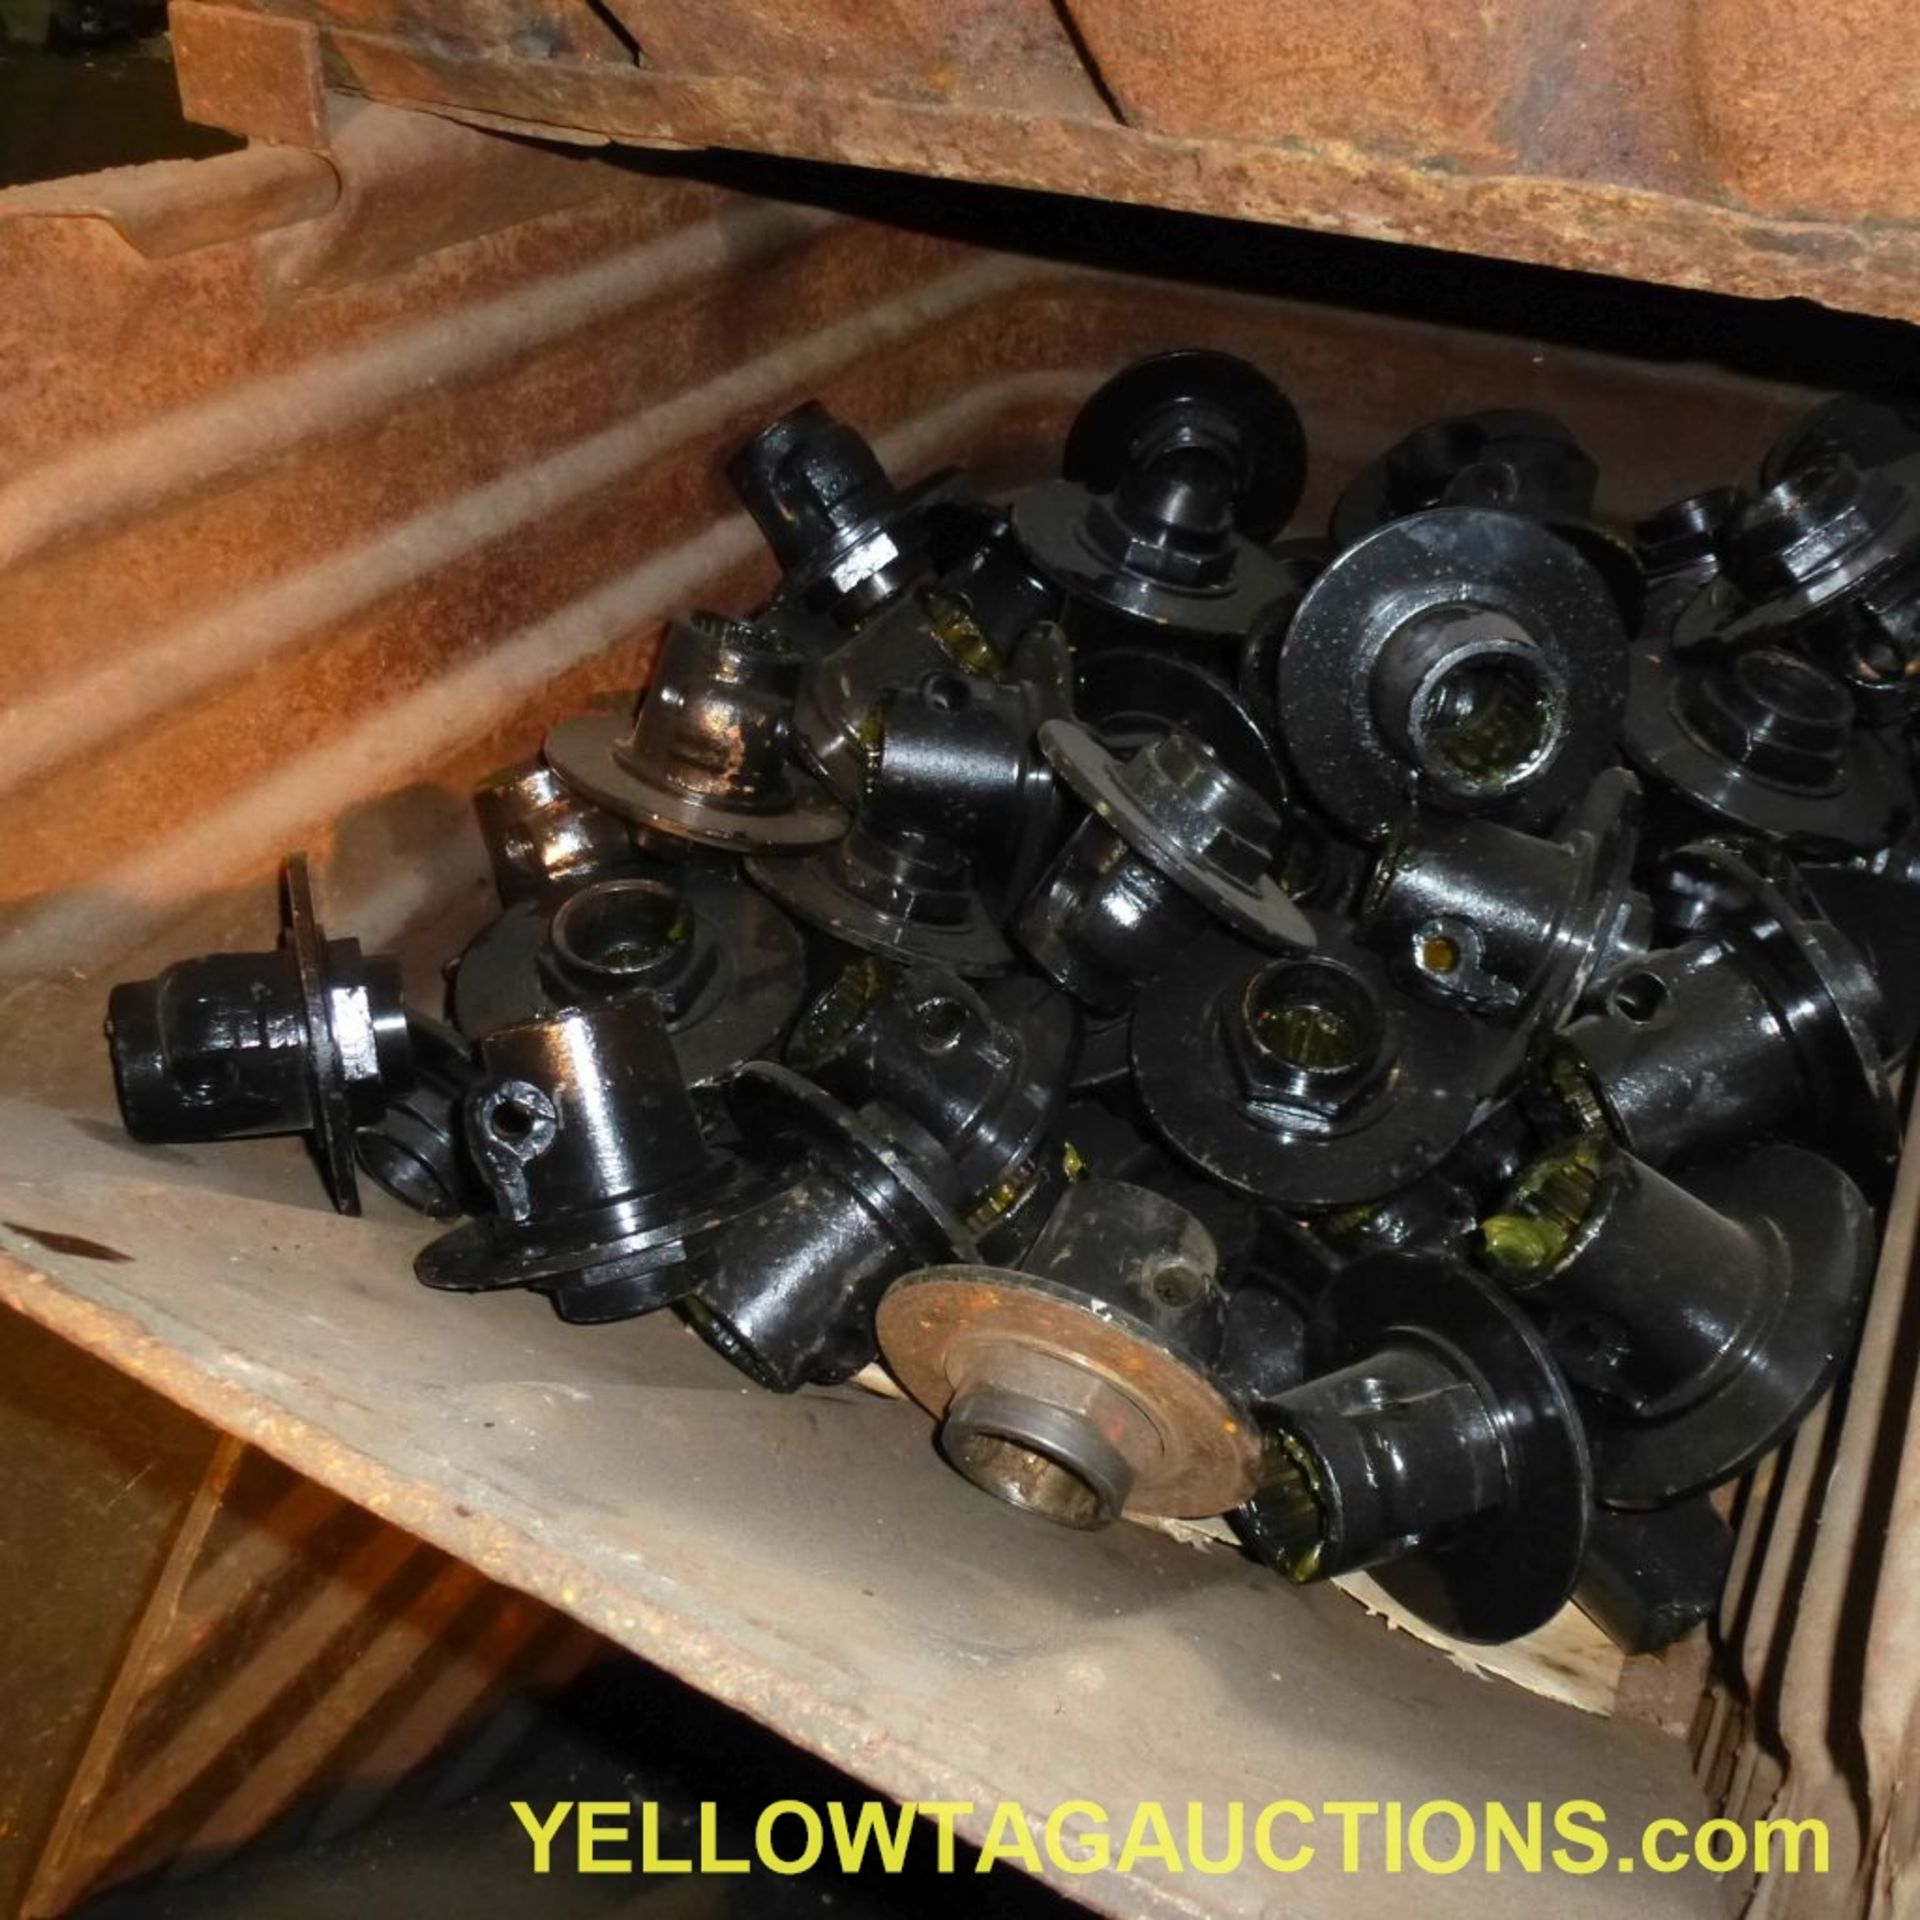 Lot of (62) Assorted Items|Approx. (60) Torque Limiter Housings; (3) Storage Bins, 36" x 24" x 20"| - Image 4 of 4